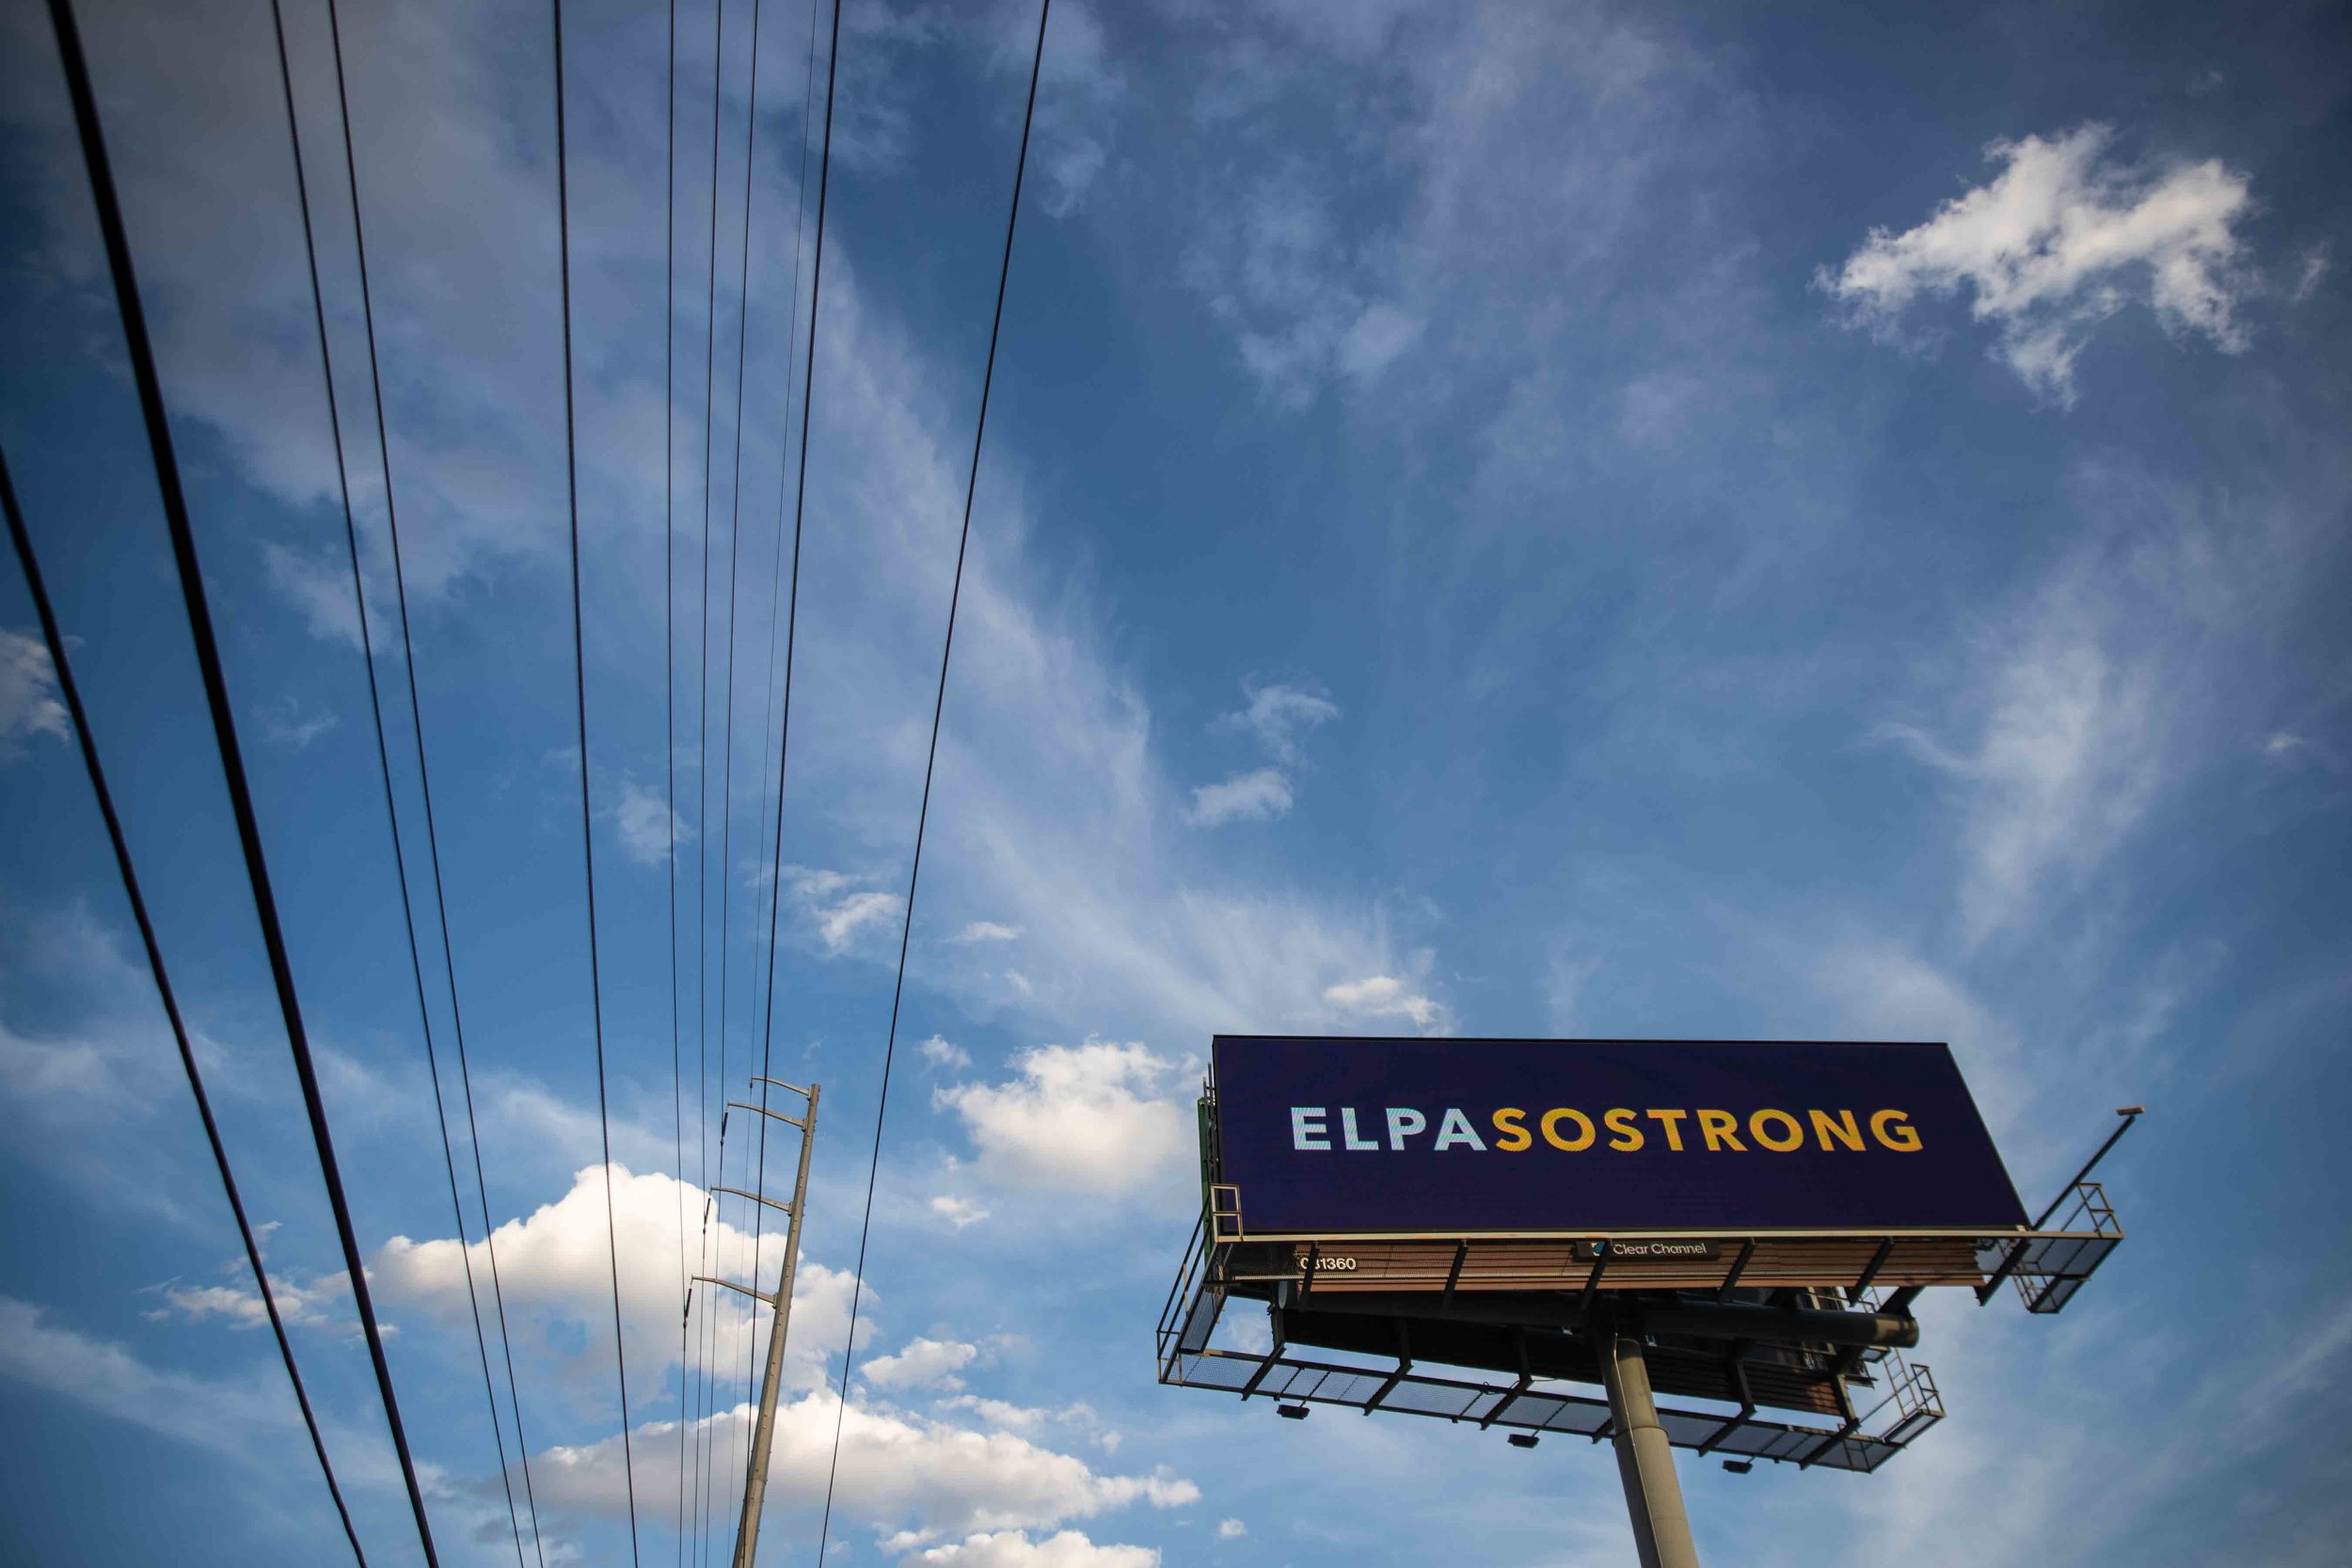  A banner that reads "ELPASOSTRONG" is located near Lomaland Dr in El Paso on Monday, August 5, 2019. 